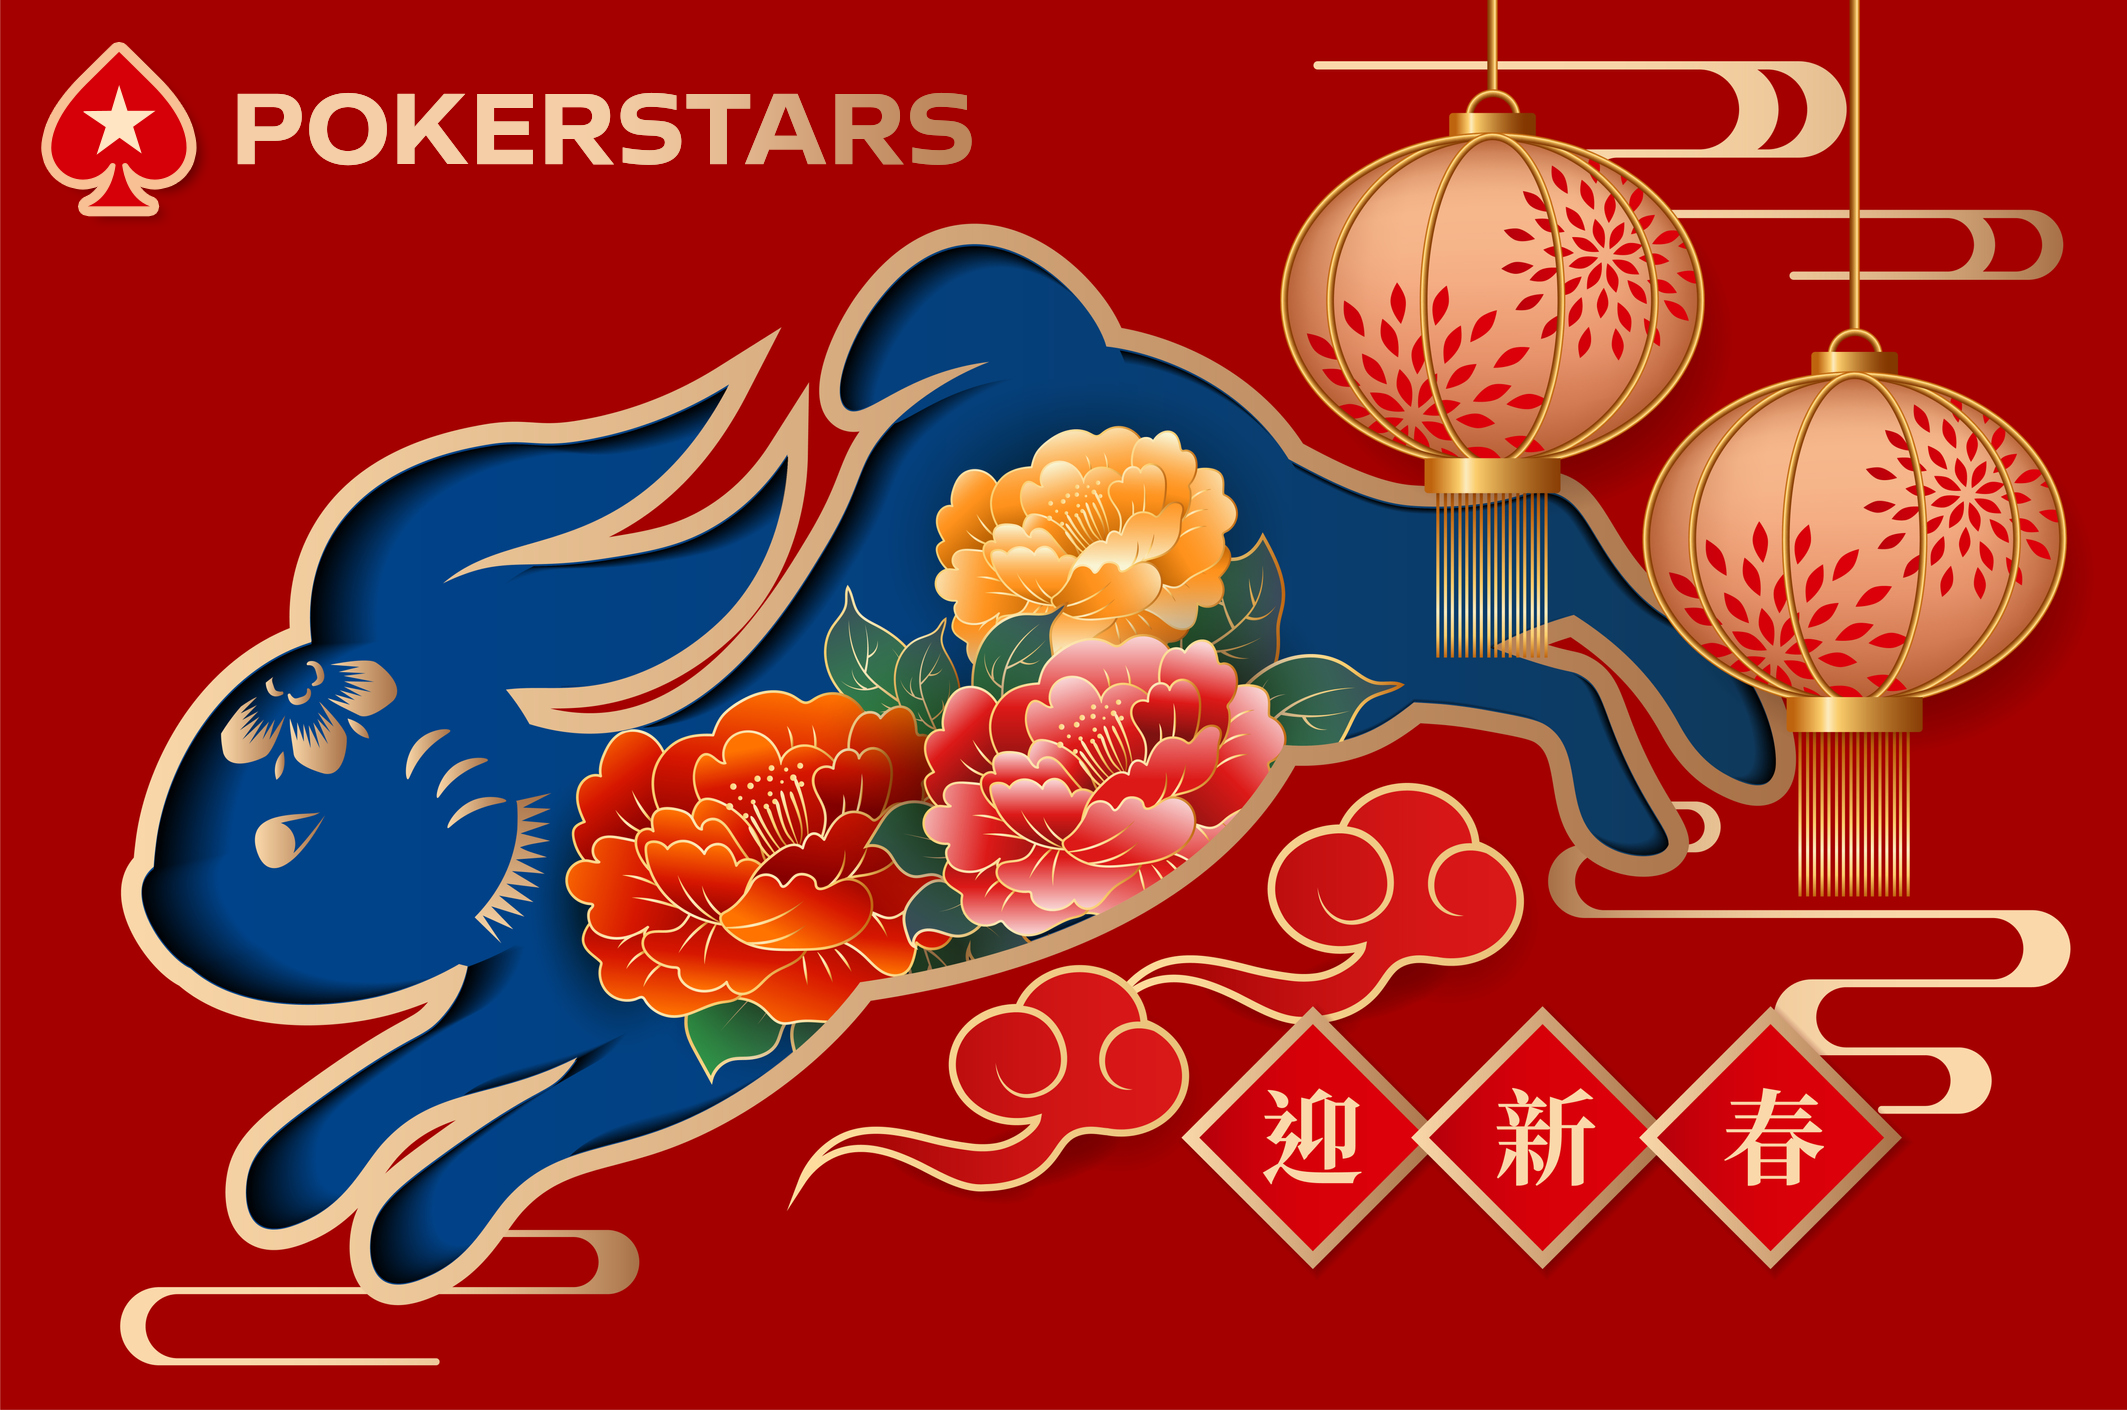 Chinese New Year’s Series Another Success for PokerStars Ontario